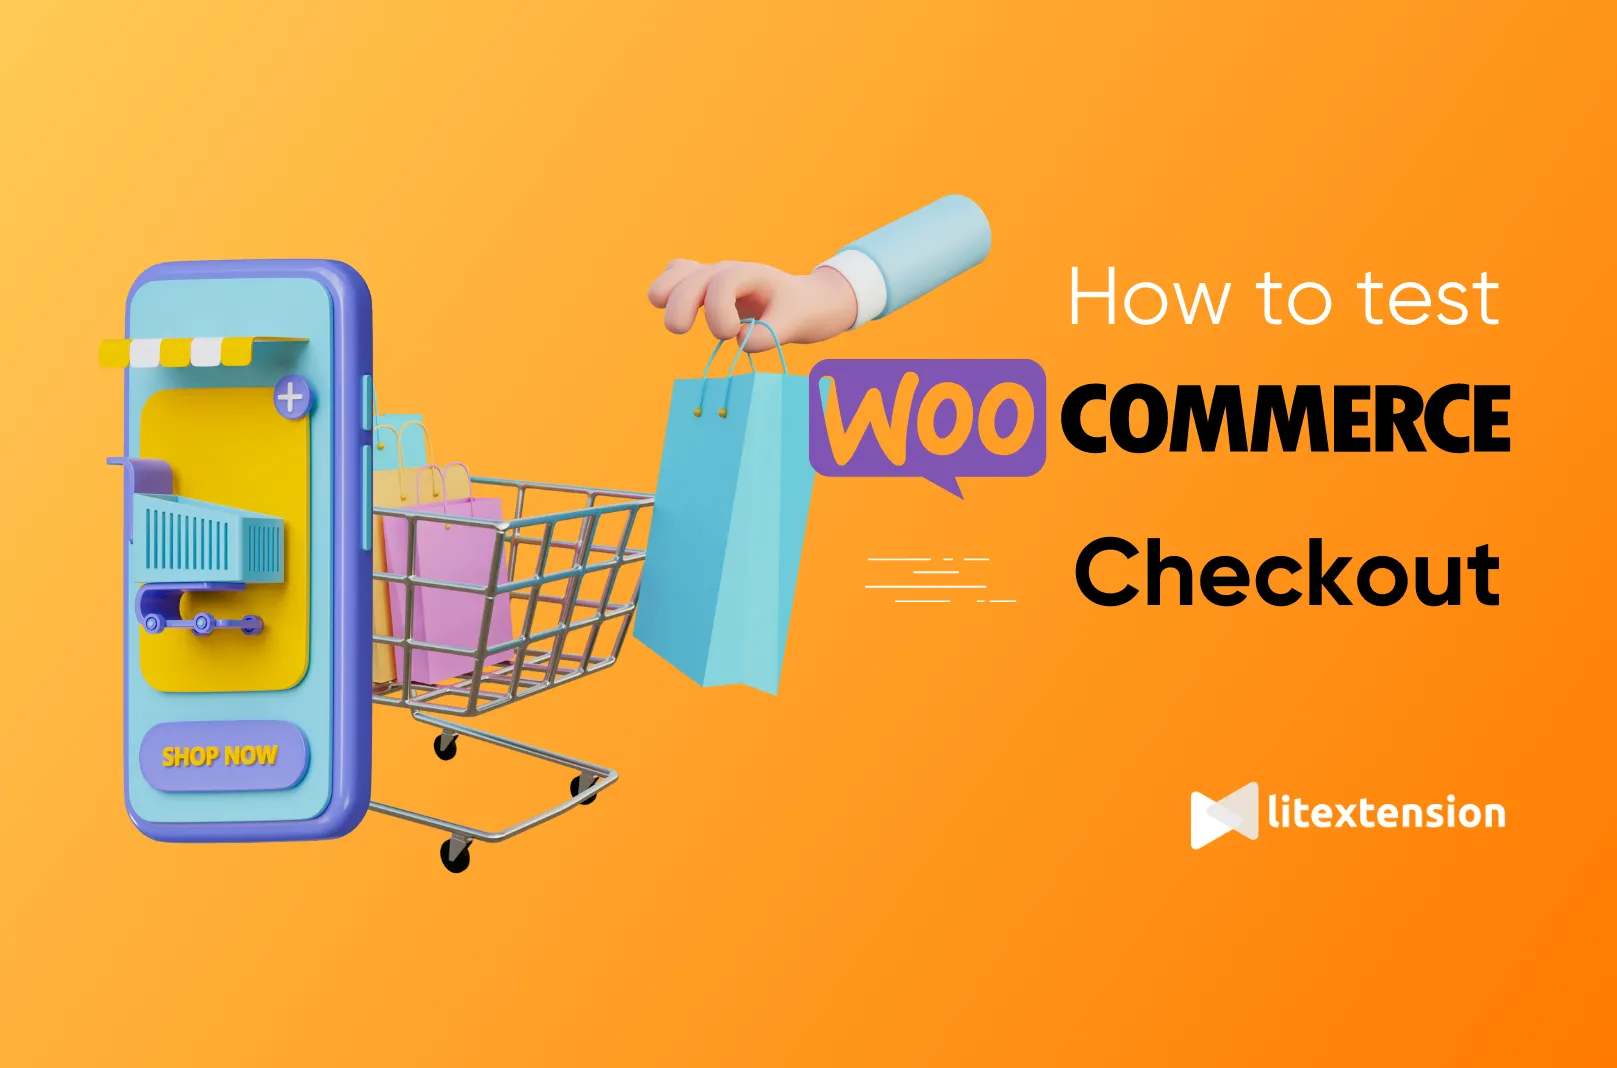 https://litextension.com/blog/wp-content/uploads/2023/08/How-to-Test-WooCommerce-Checkout.webp